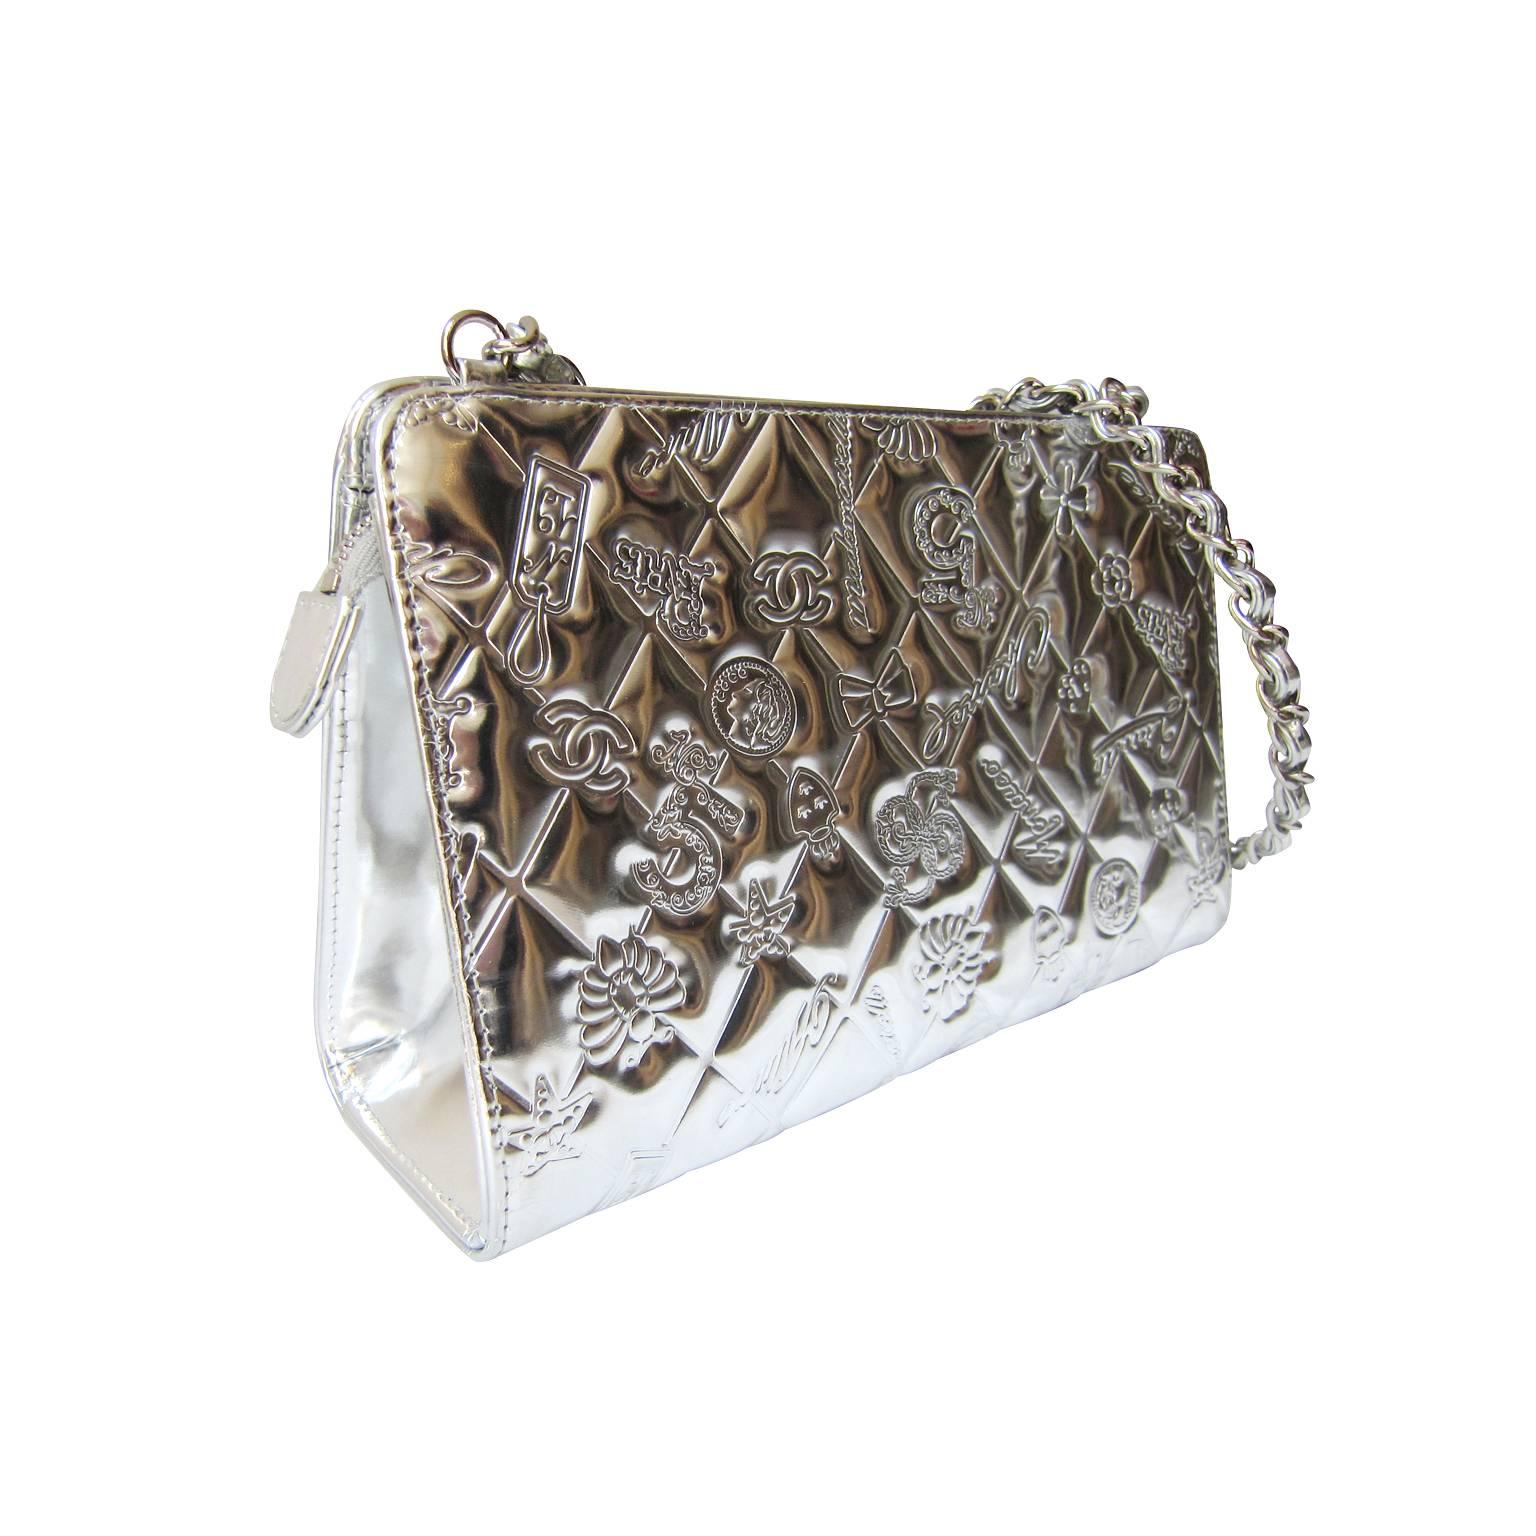 Limited edition Chanel metallic silver quilted leather embossed charm bag from 1999.
Single chain and leather entwined handle, fine textile lining with one small flat pocket interior. Zip closure. 
Made in France. 
Measurements :
14 x 23 x 7